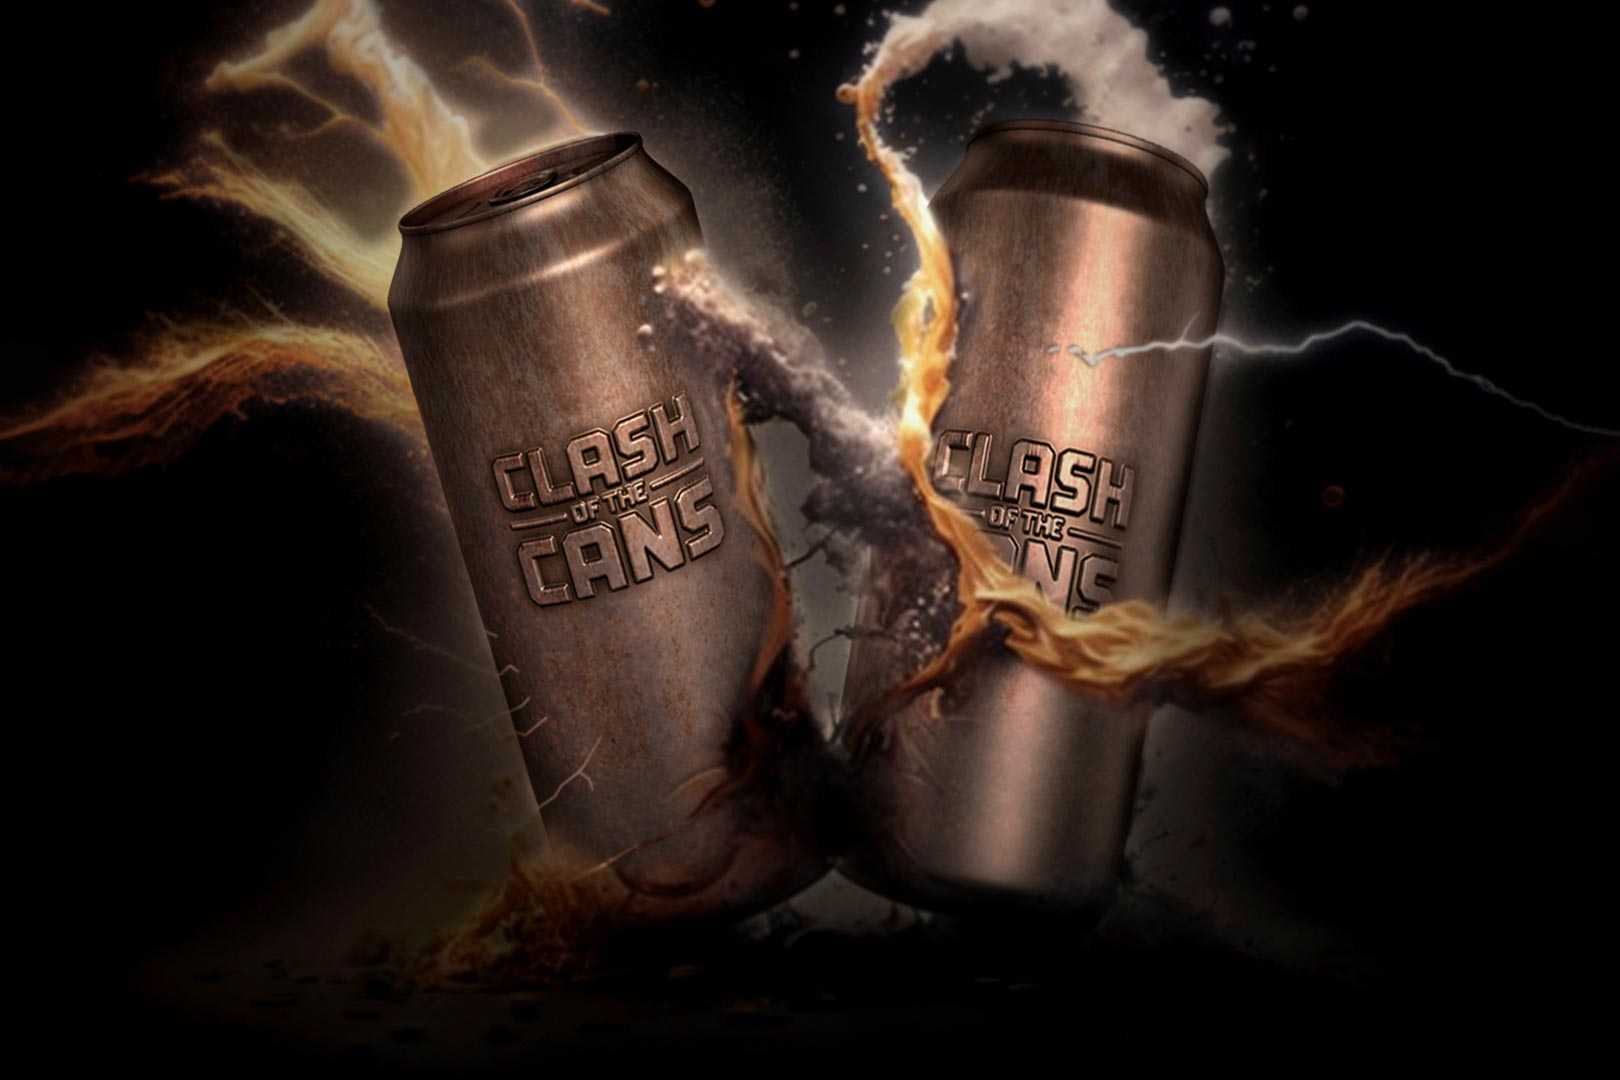 Clash Of The Cans Lineup